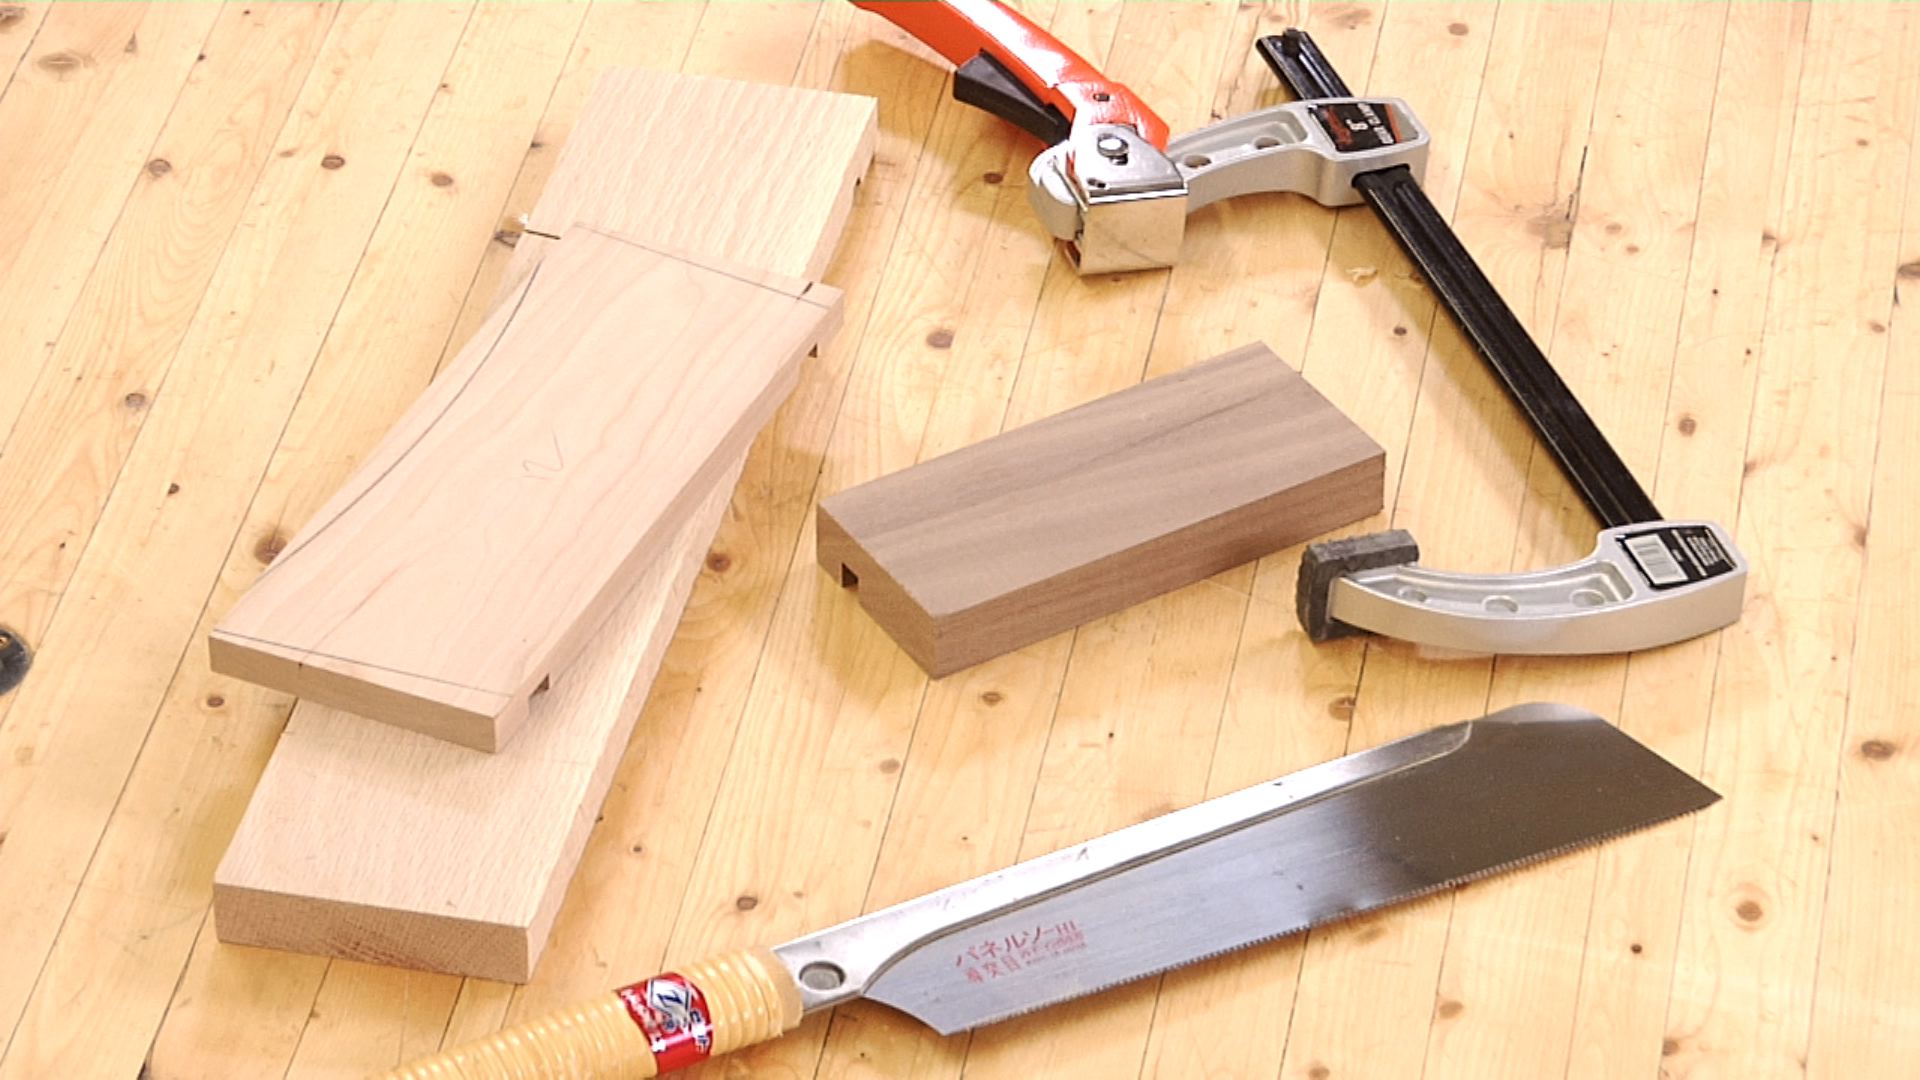 Using a Handsaw for an Accurate Crosscut product featured image thumbnail.